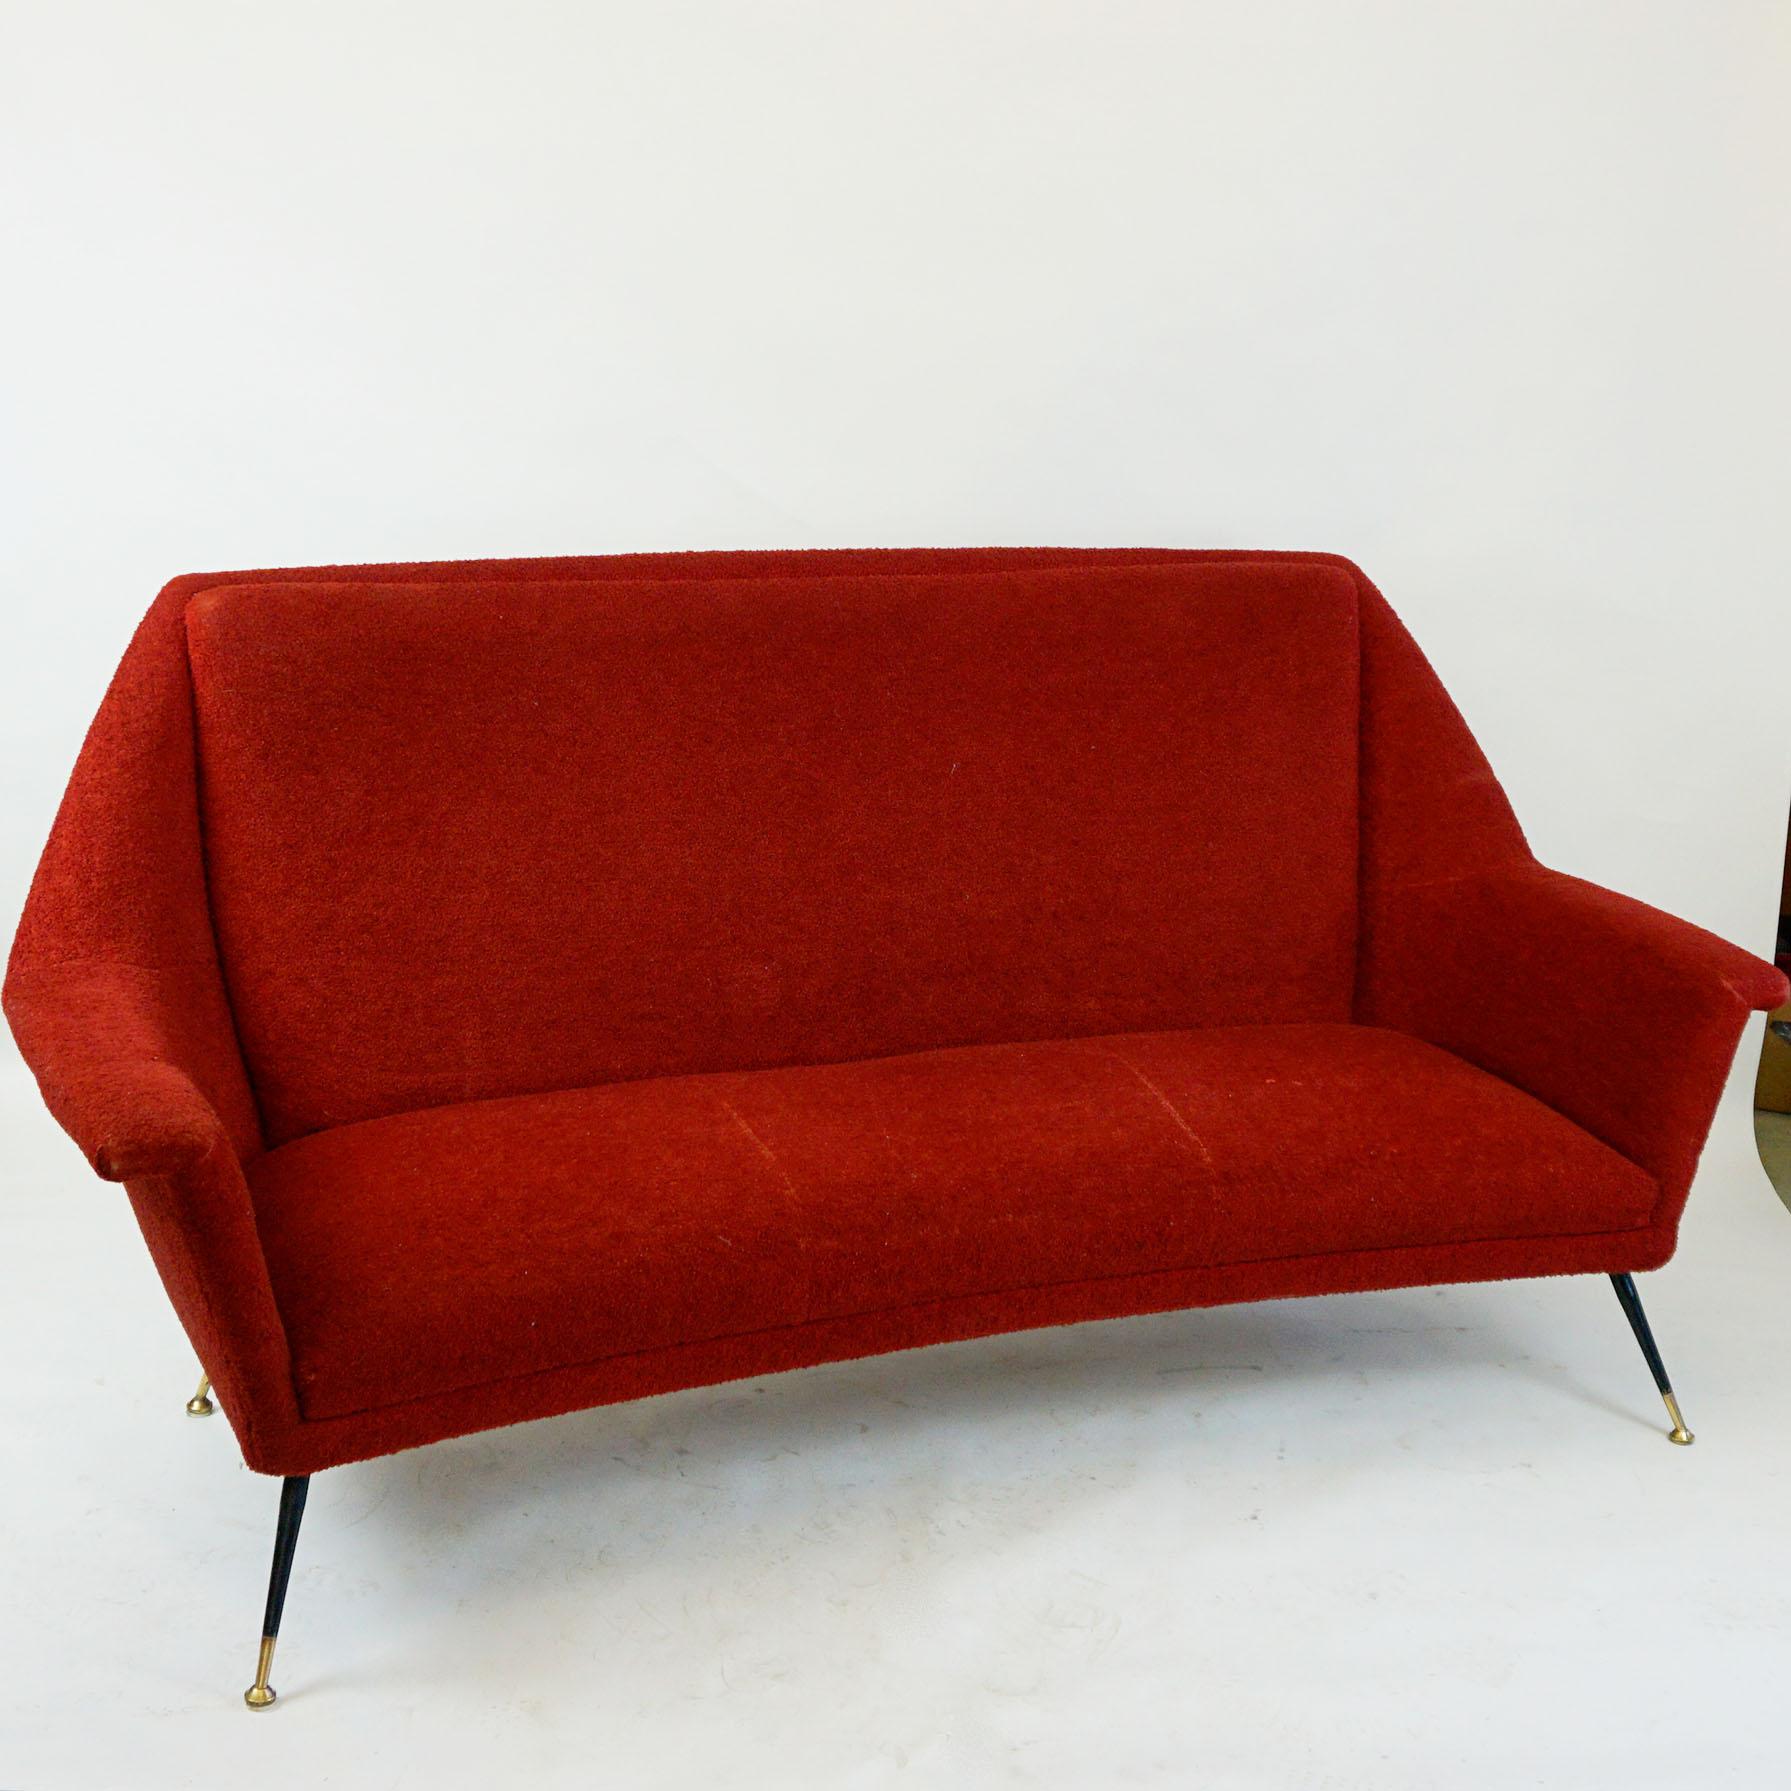 This elegant Italian midcentury three seat sofa with brass legs still has its original red fabric which still looks very charming. If you like We can also offer new upholstery to you, pls send a request.
Iconic and beautiful settee, also perfect